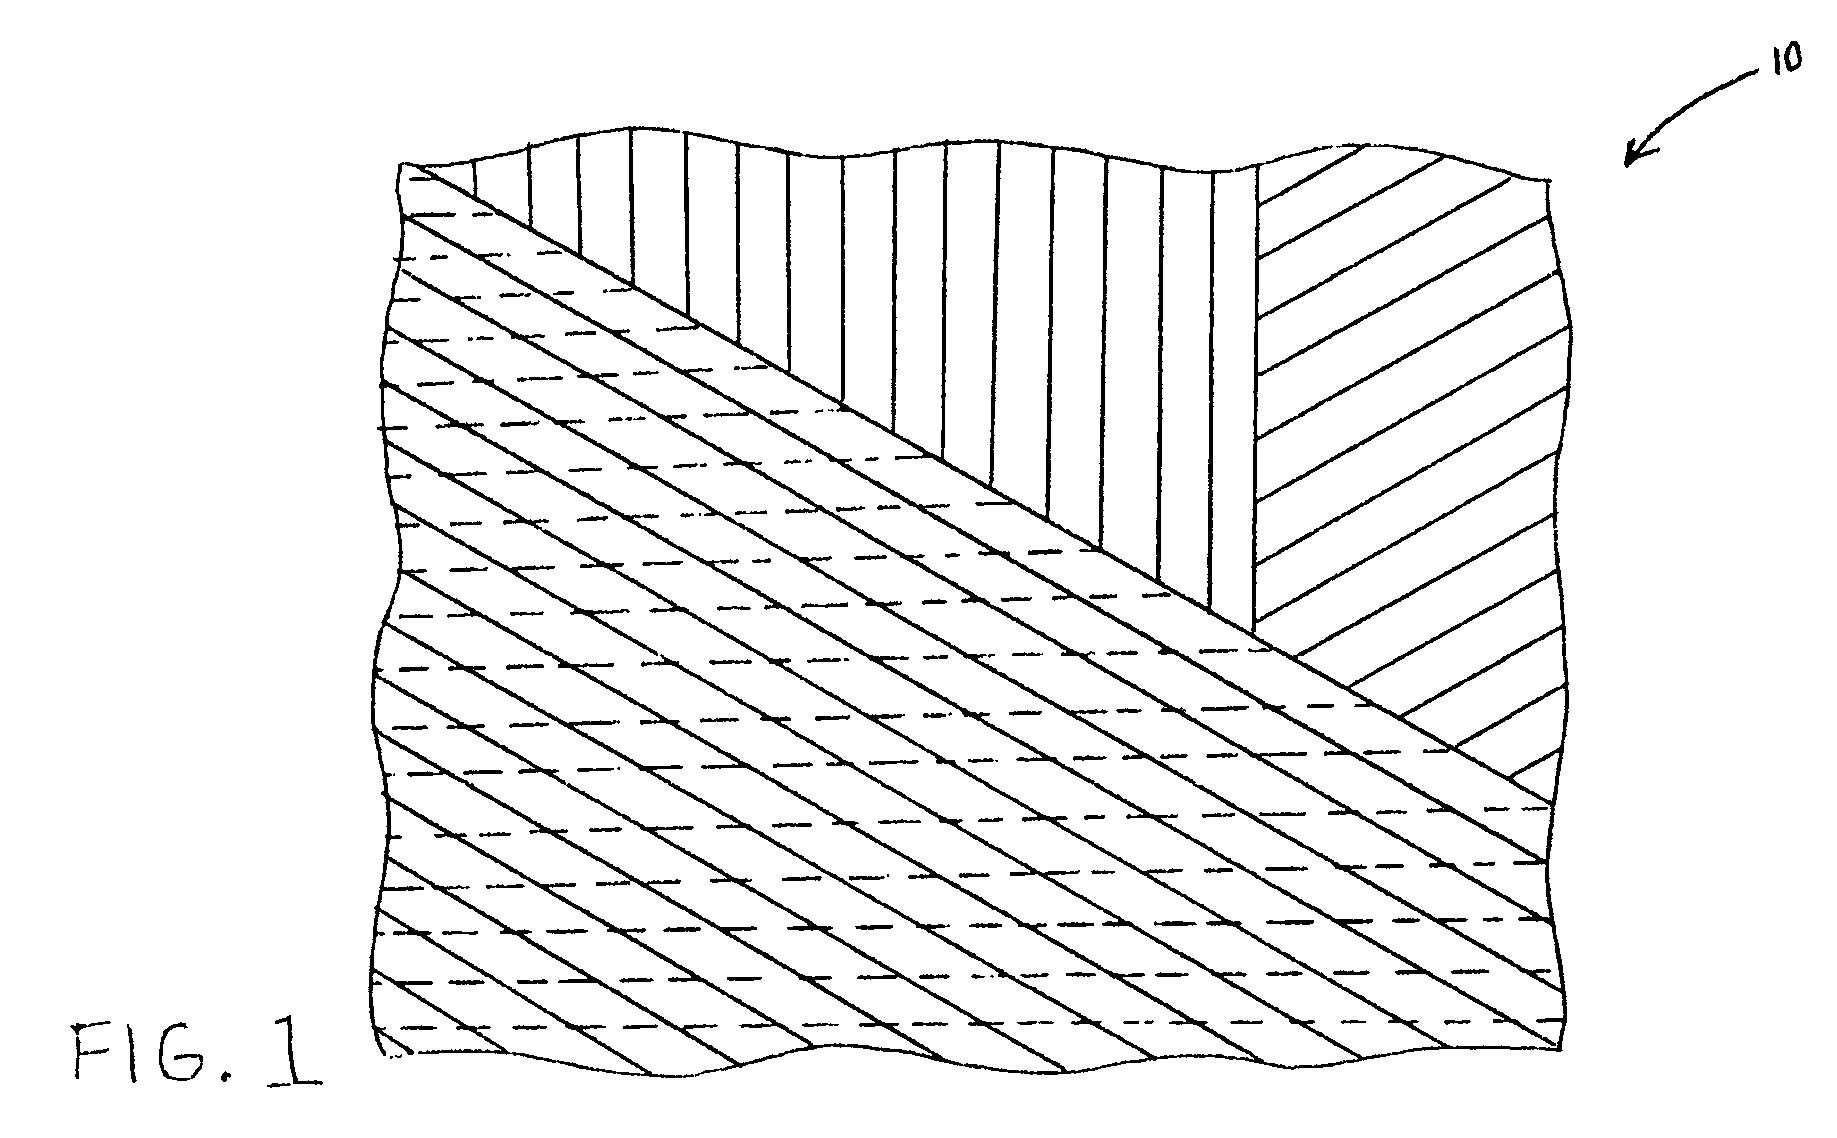 Methods for improving conformability of non-crimp fabric and contoured composite components made using such methods